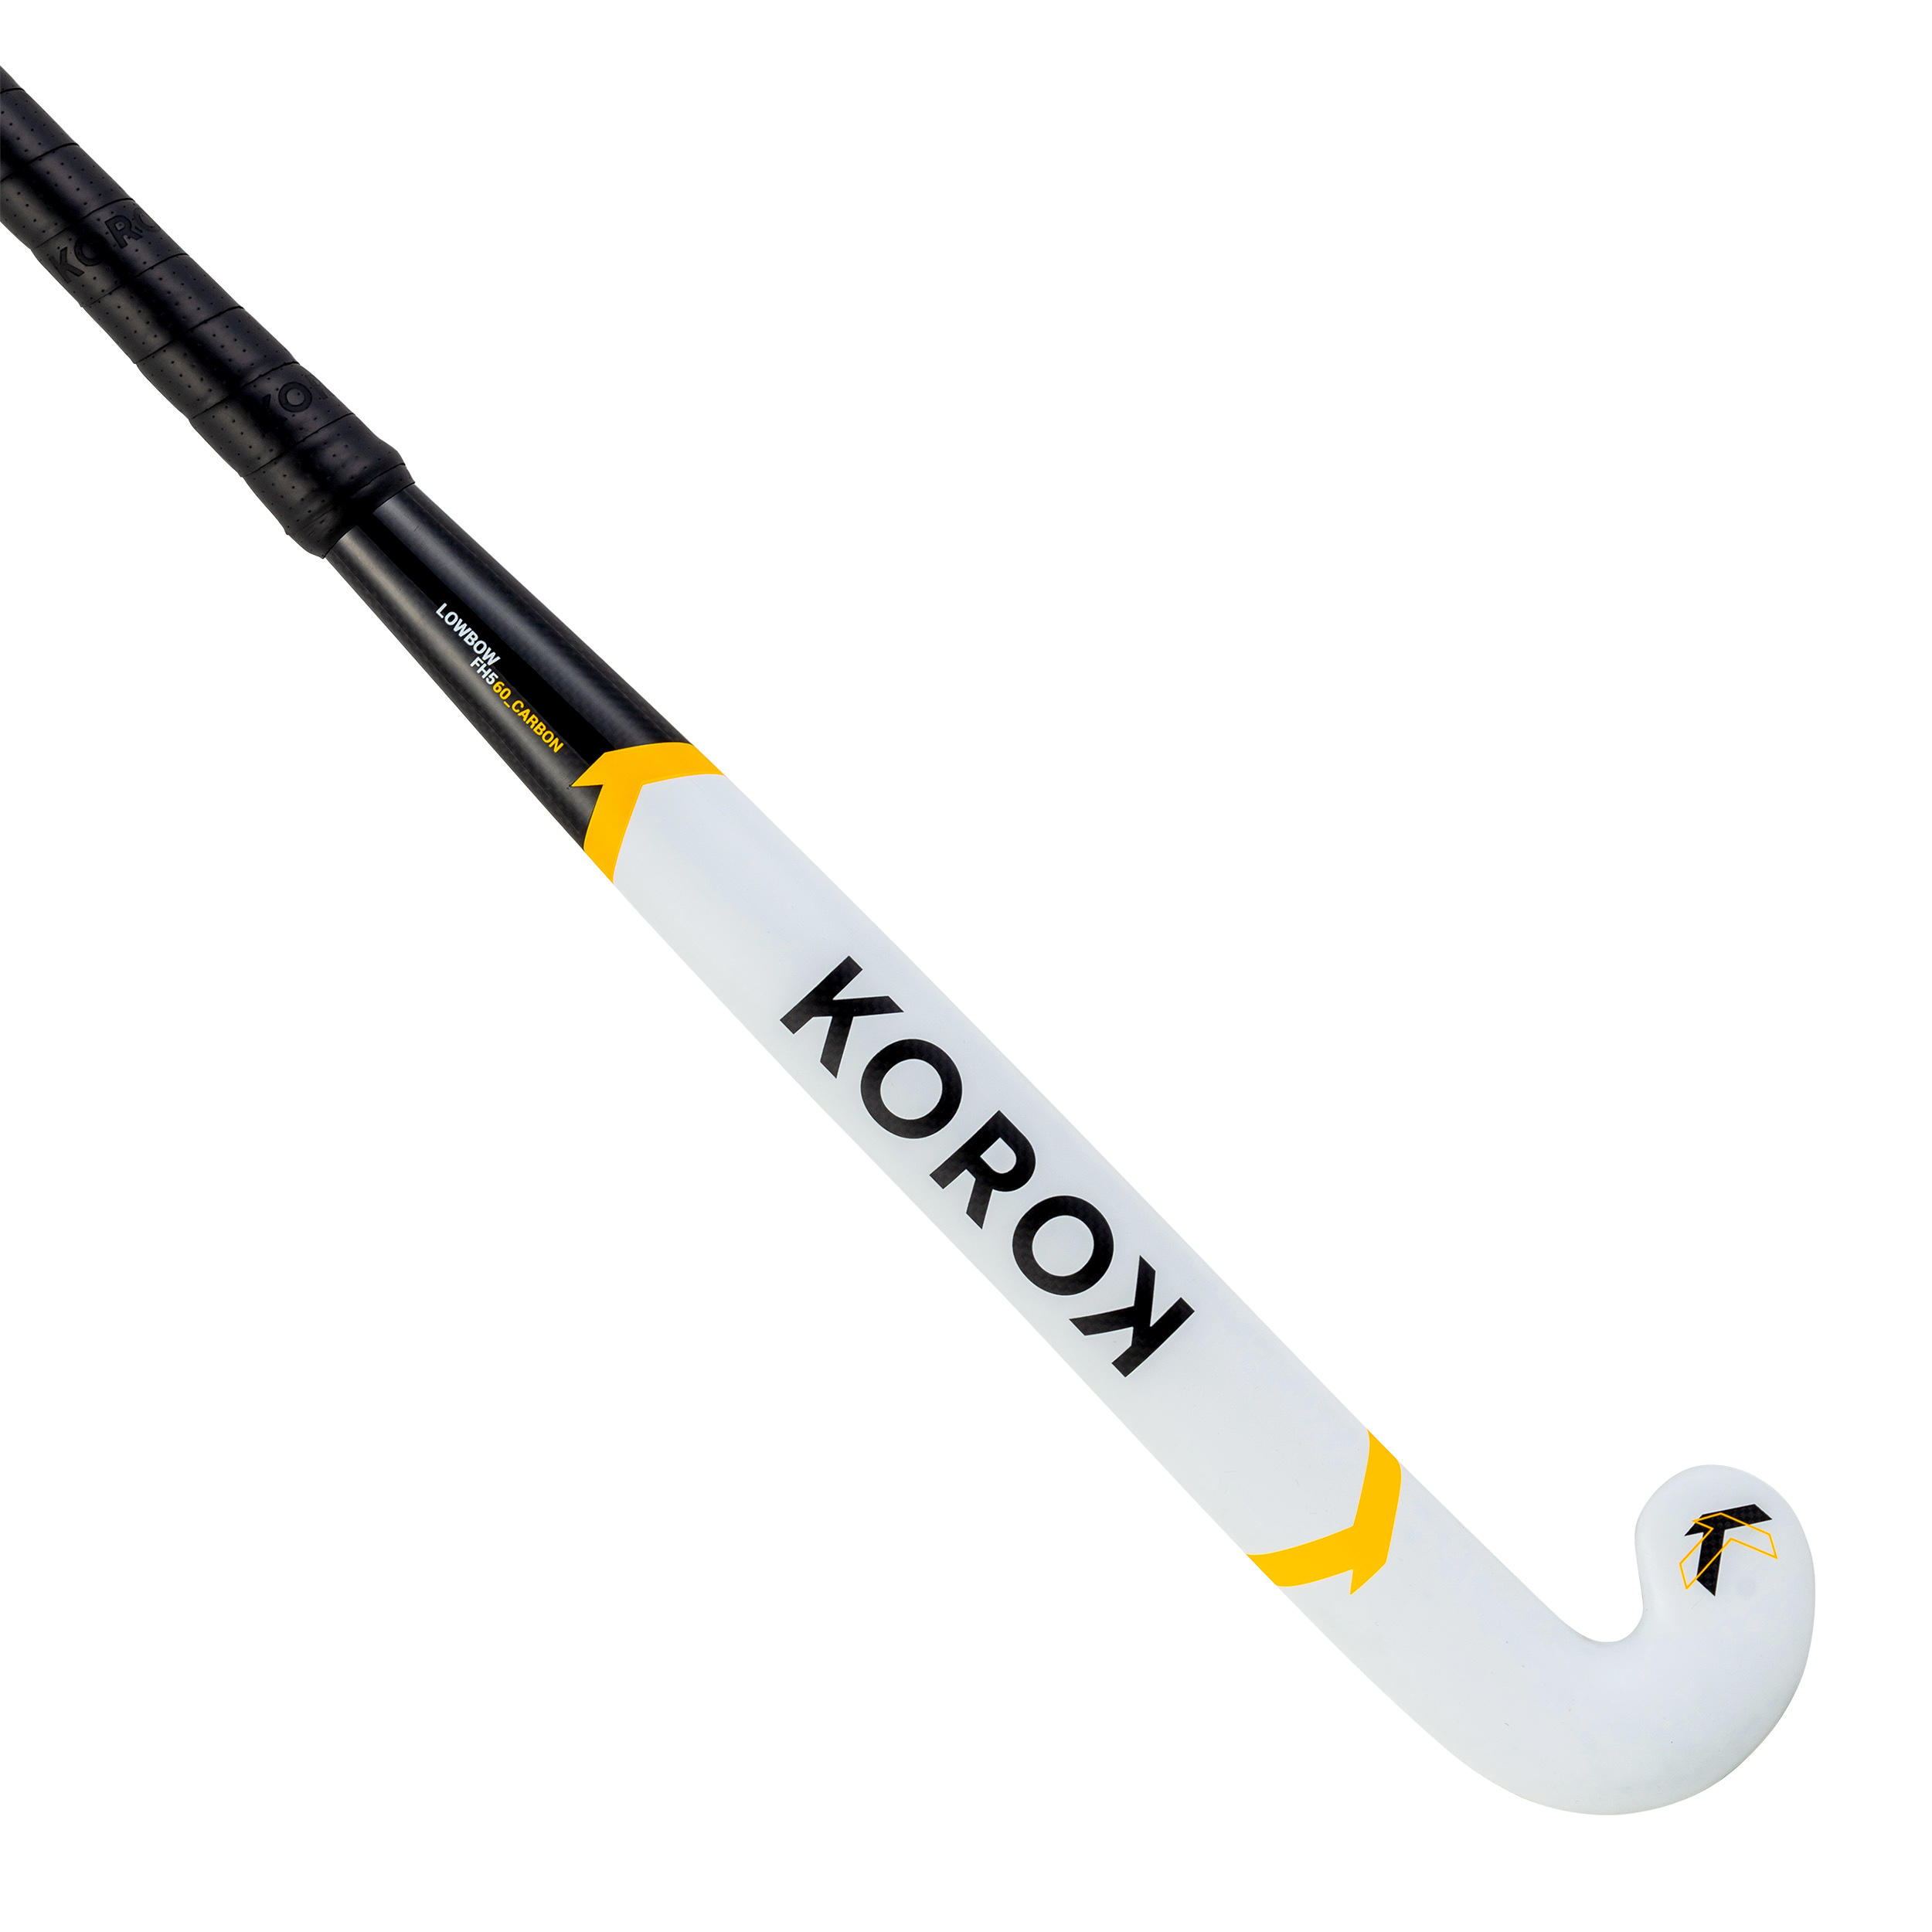 Adult Intermediate 60% Carbon Low Bow Field Hockey Stick FH560 - White/Yellow 1/12